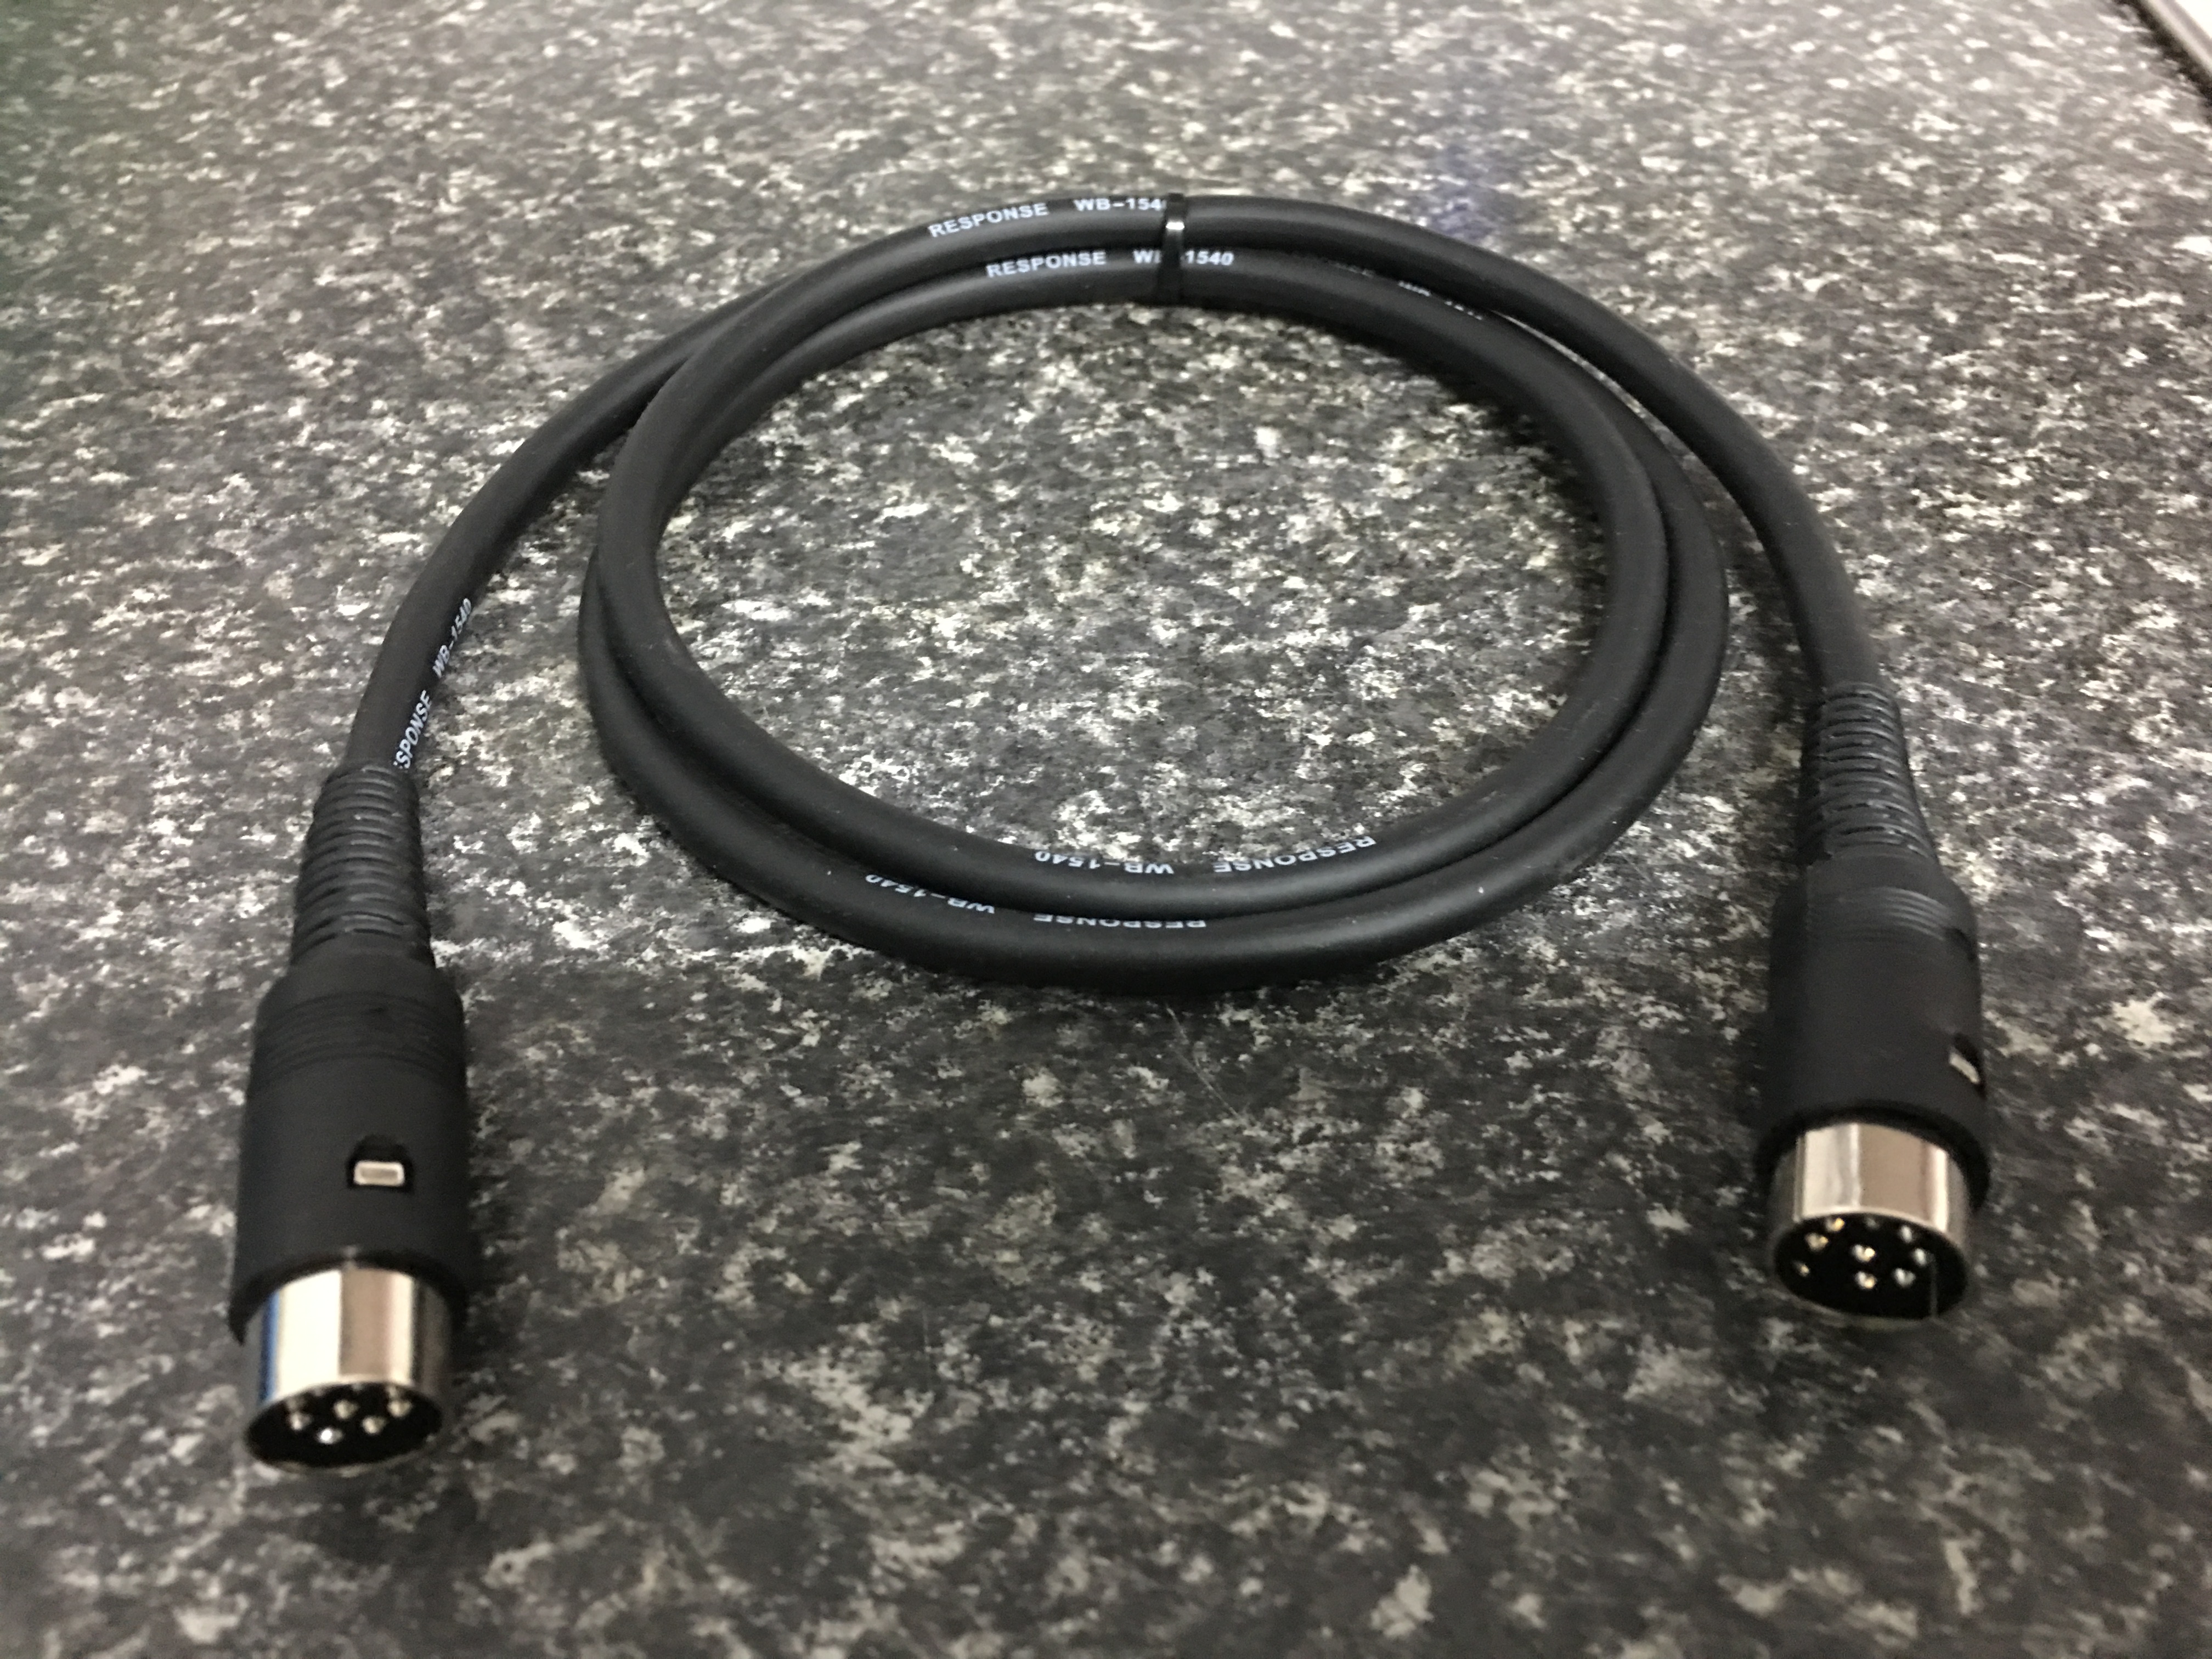 HQ 0.5 Mtr Bang & Olufsen B&O 7-Pin DIN Socket to RCA Plugs Output Cable 